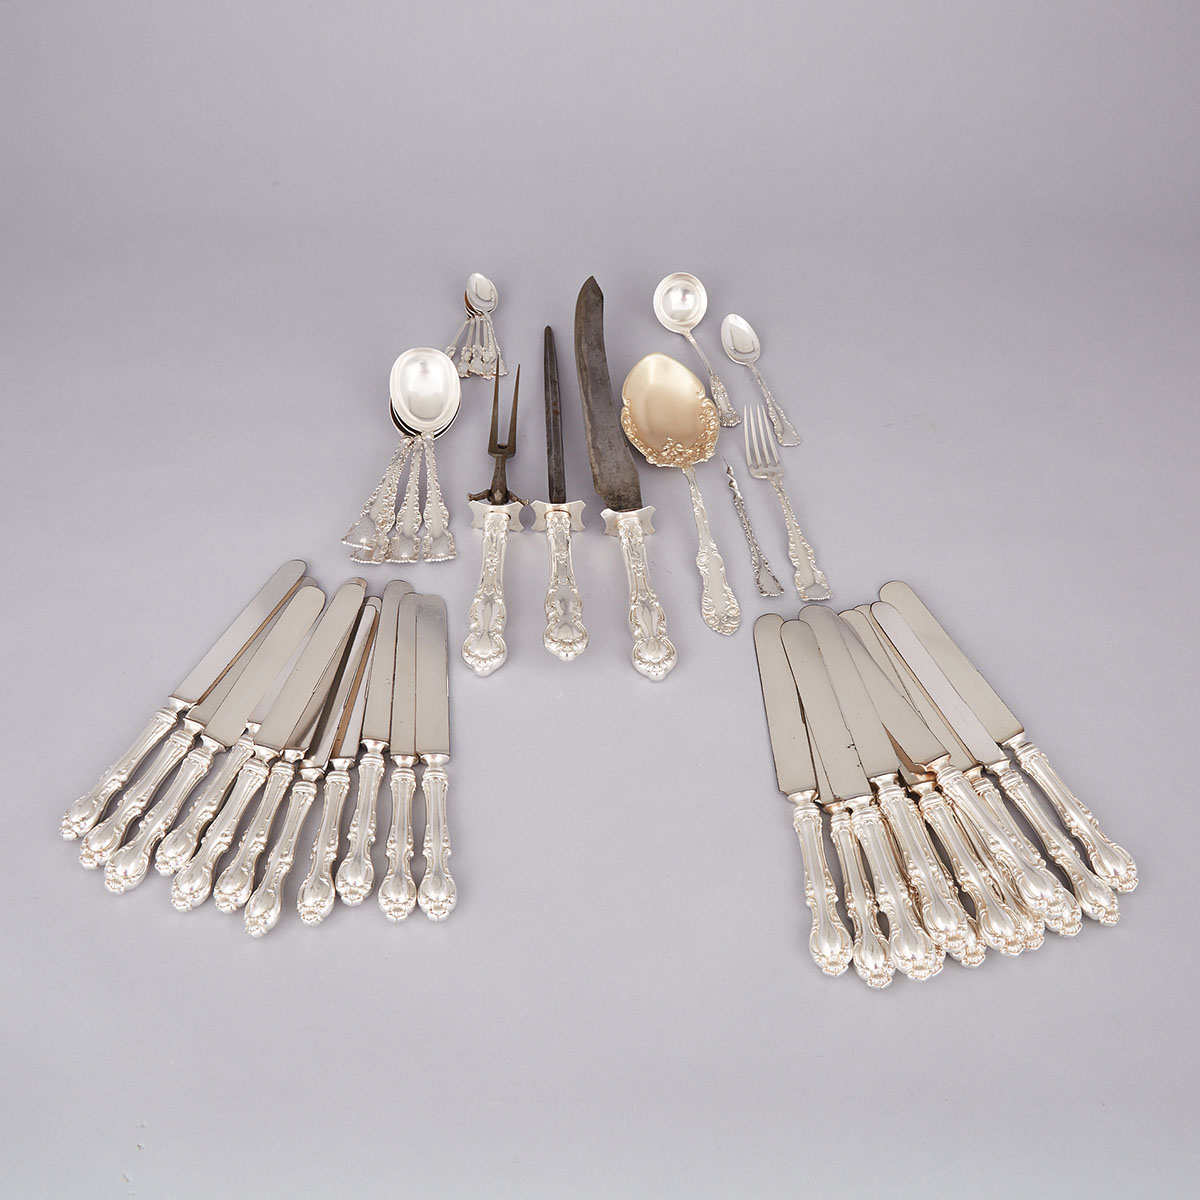 Group of Mainly North American Silver Flatware, 20th century